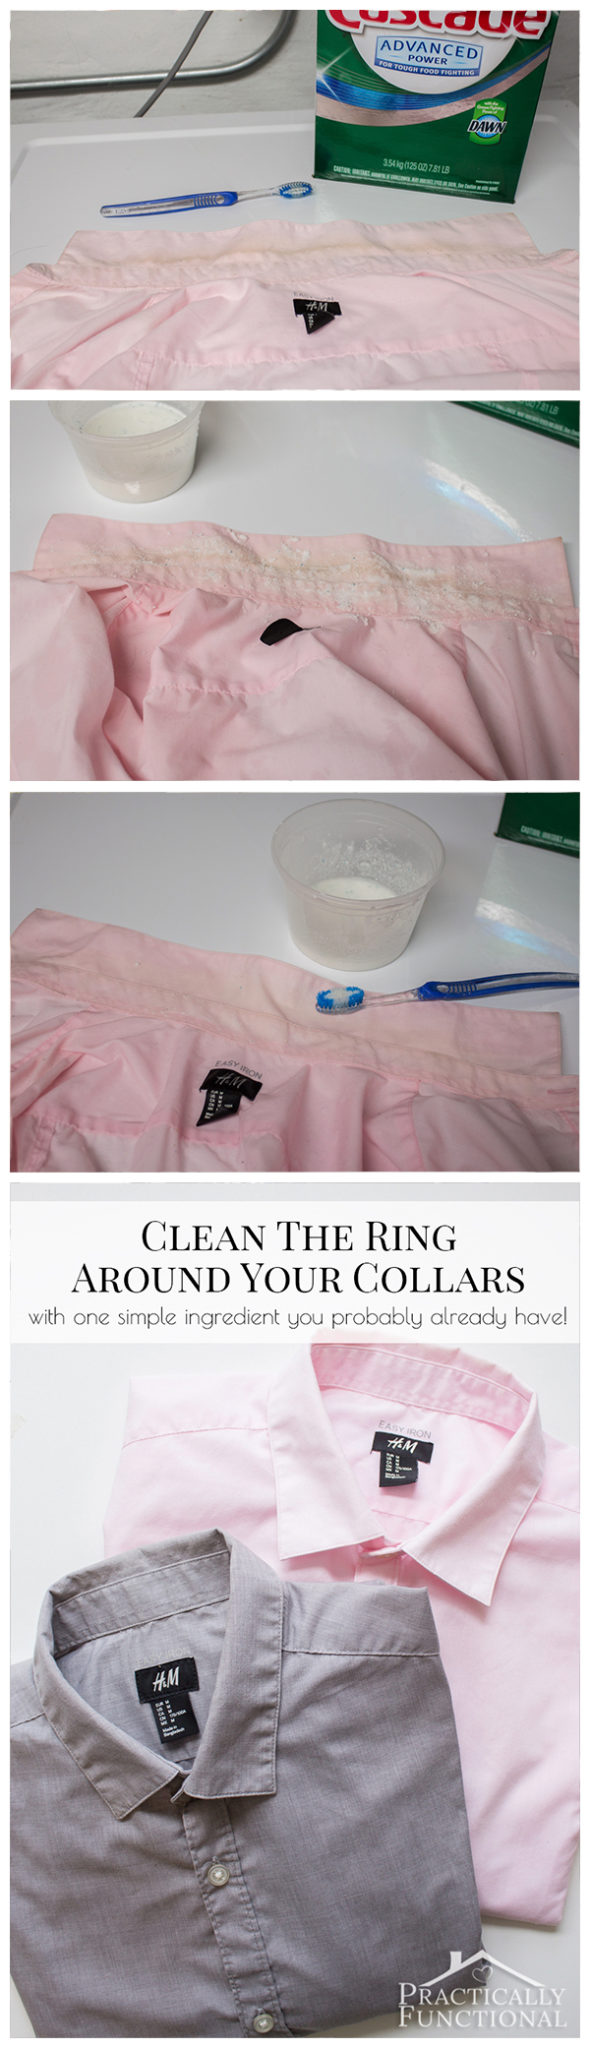 This works so well to clean the ring around the collar of your dress shirts!